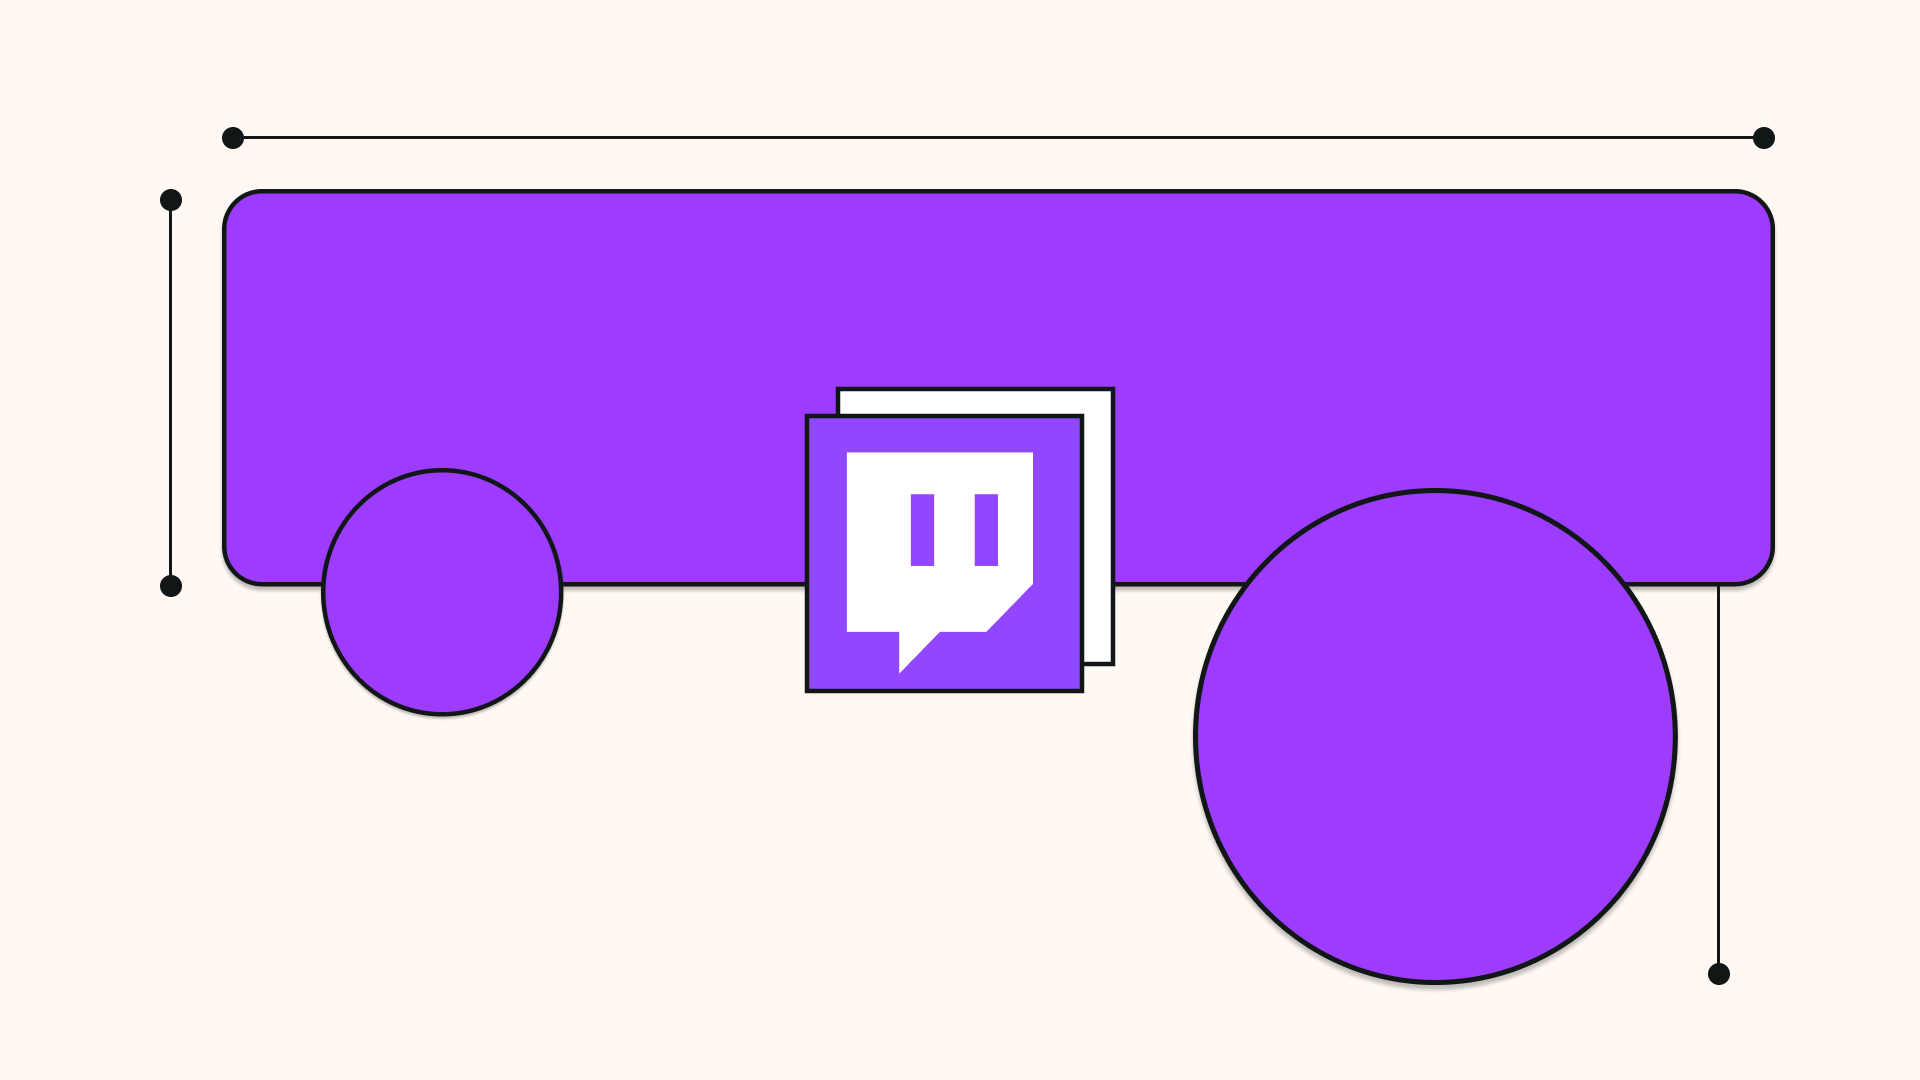 Mockup showing Twitch website with the assets